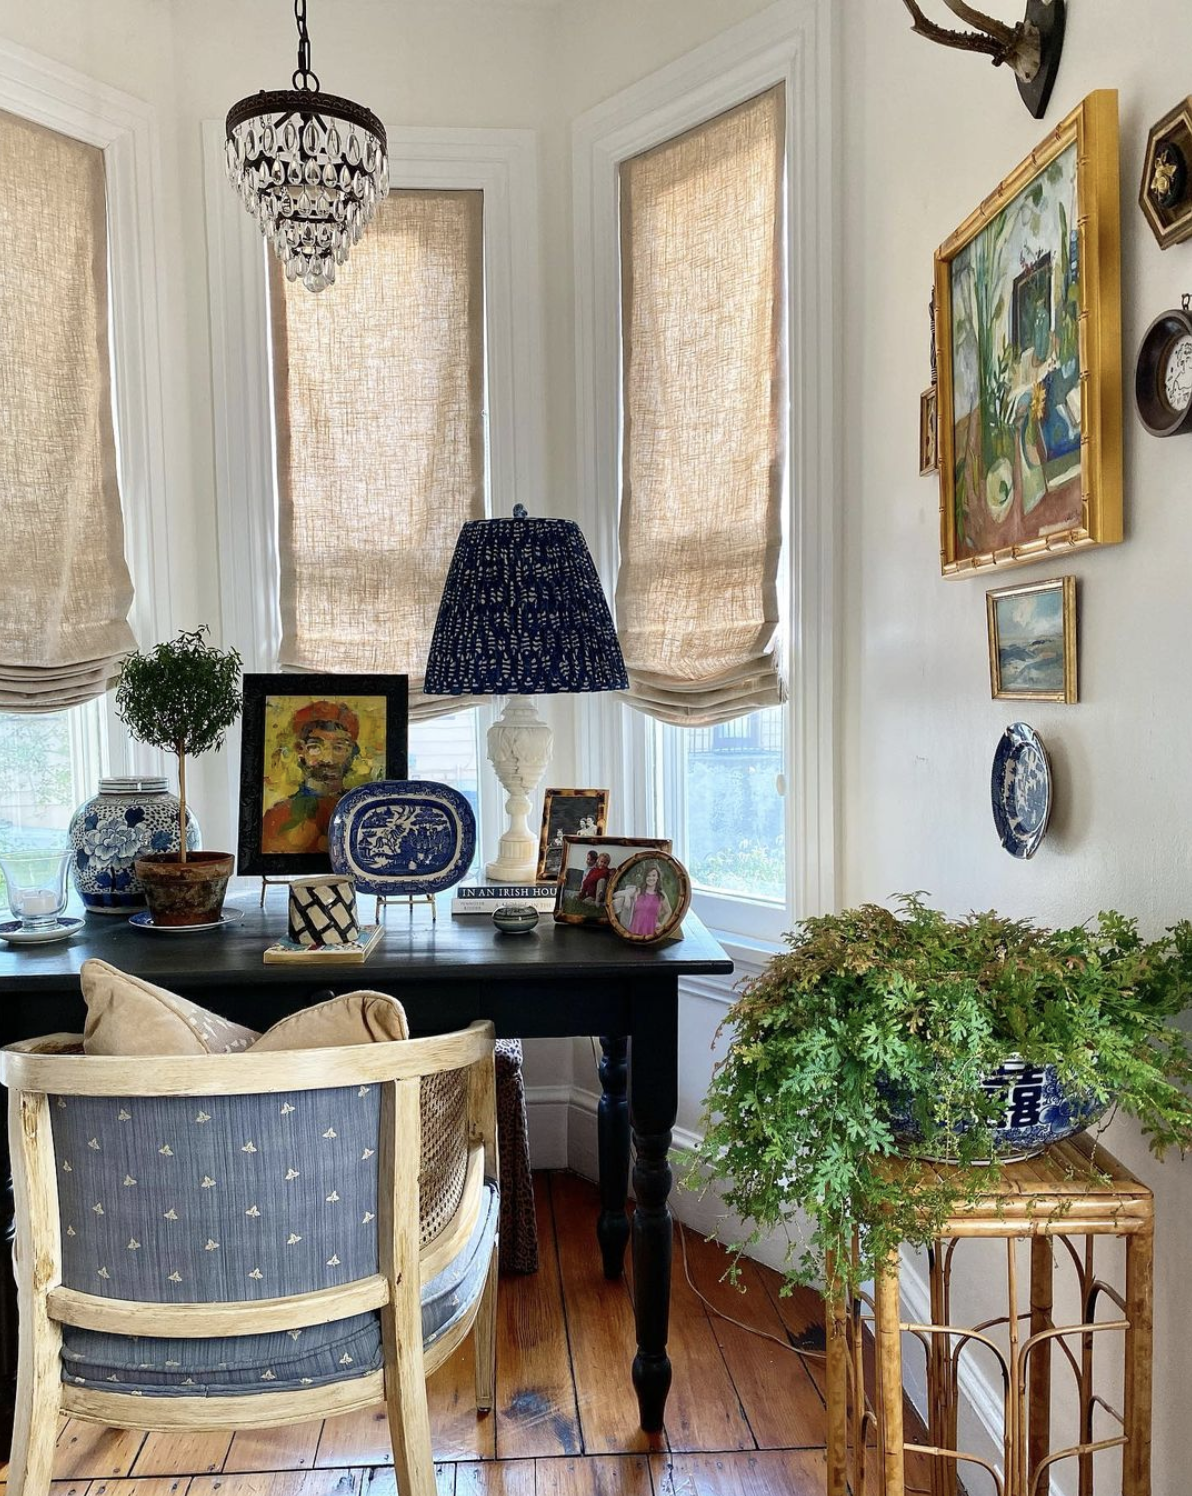 Eclectic home with antique desk and art kellyelko.com